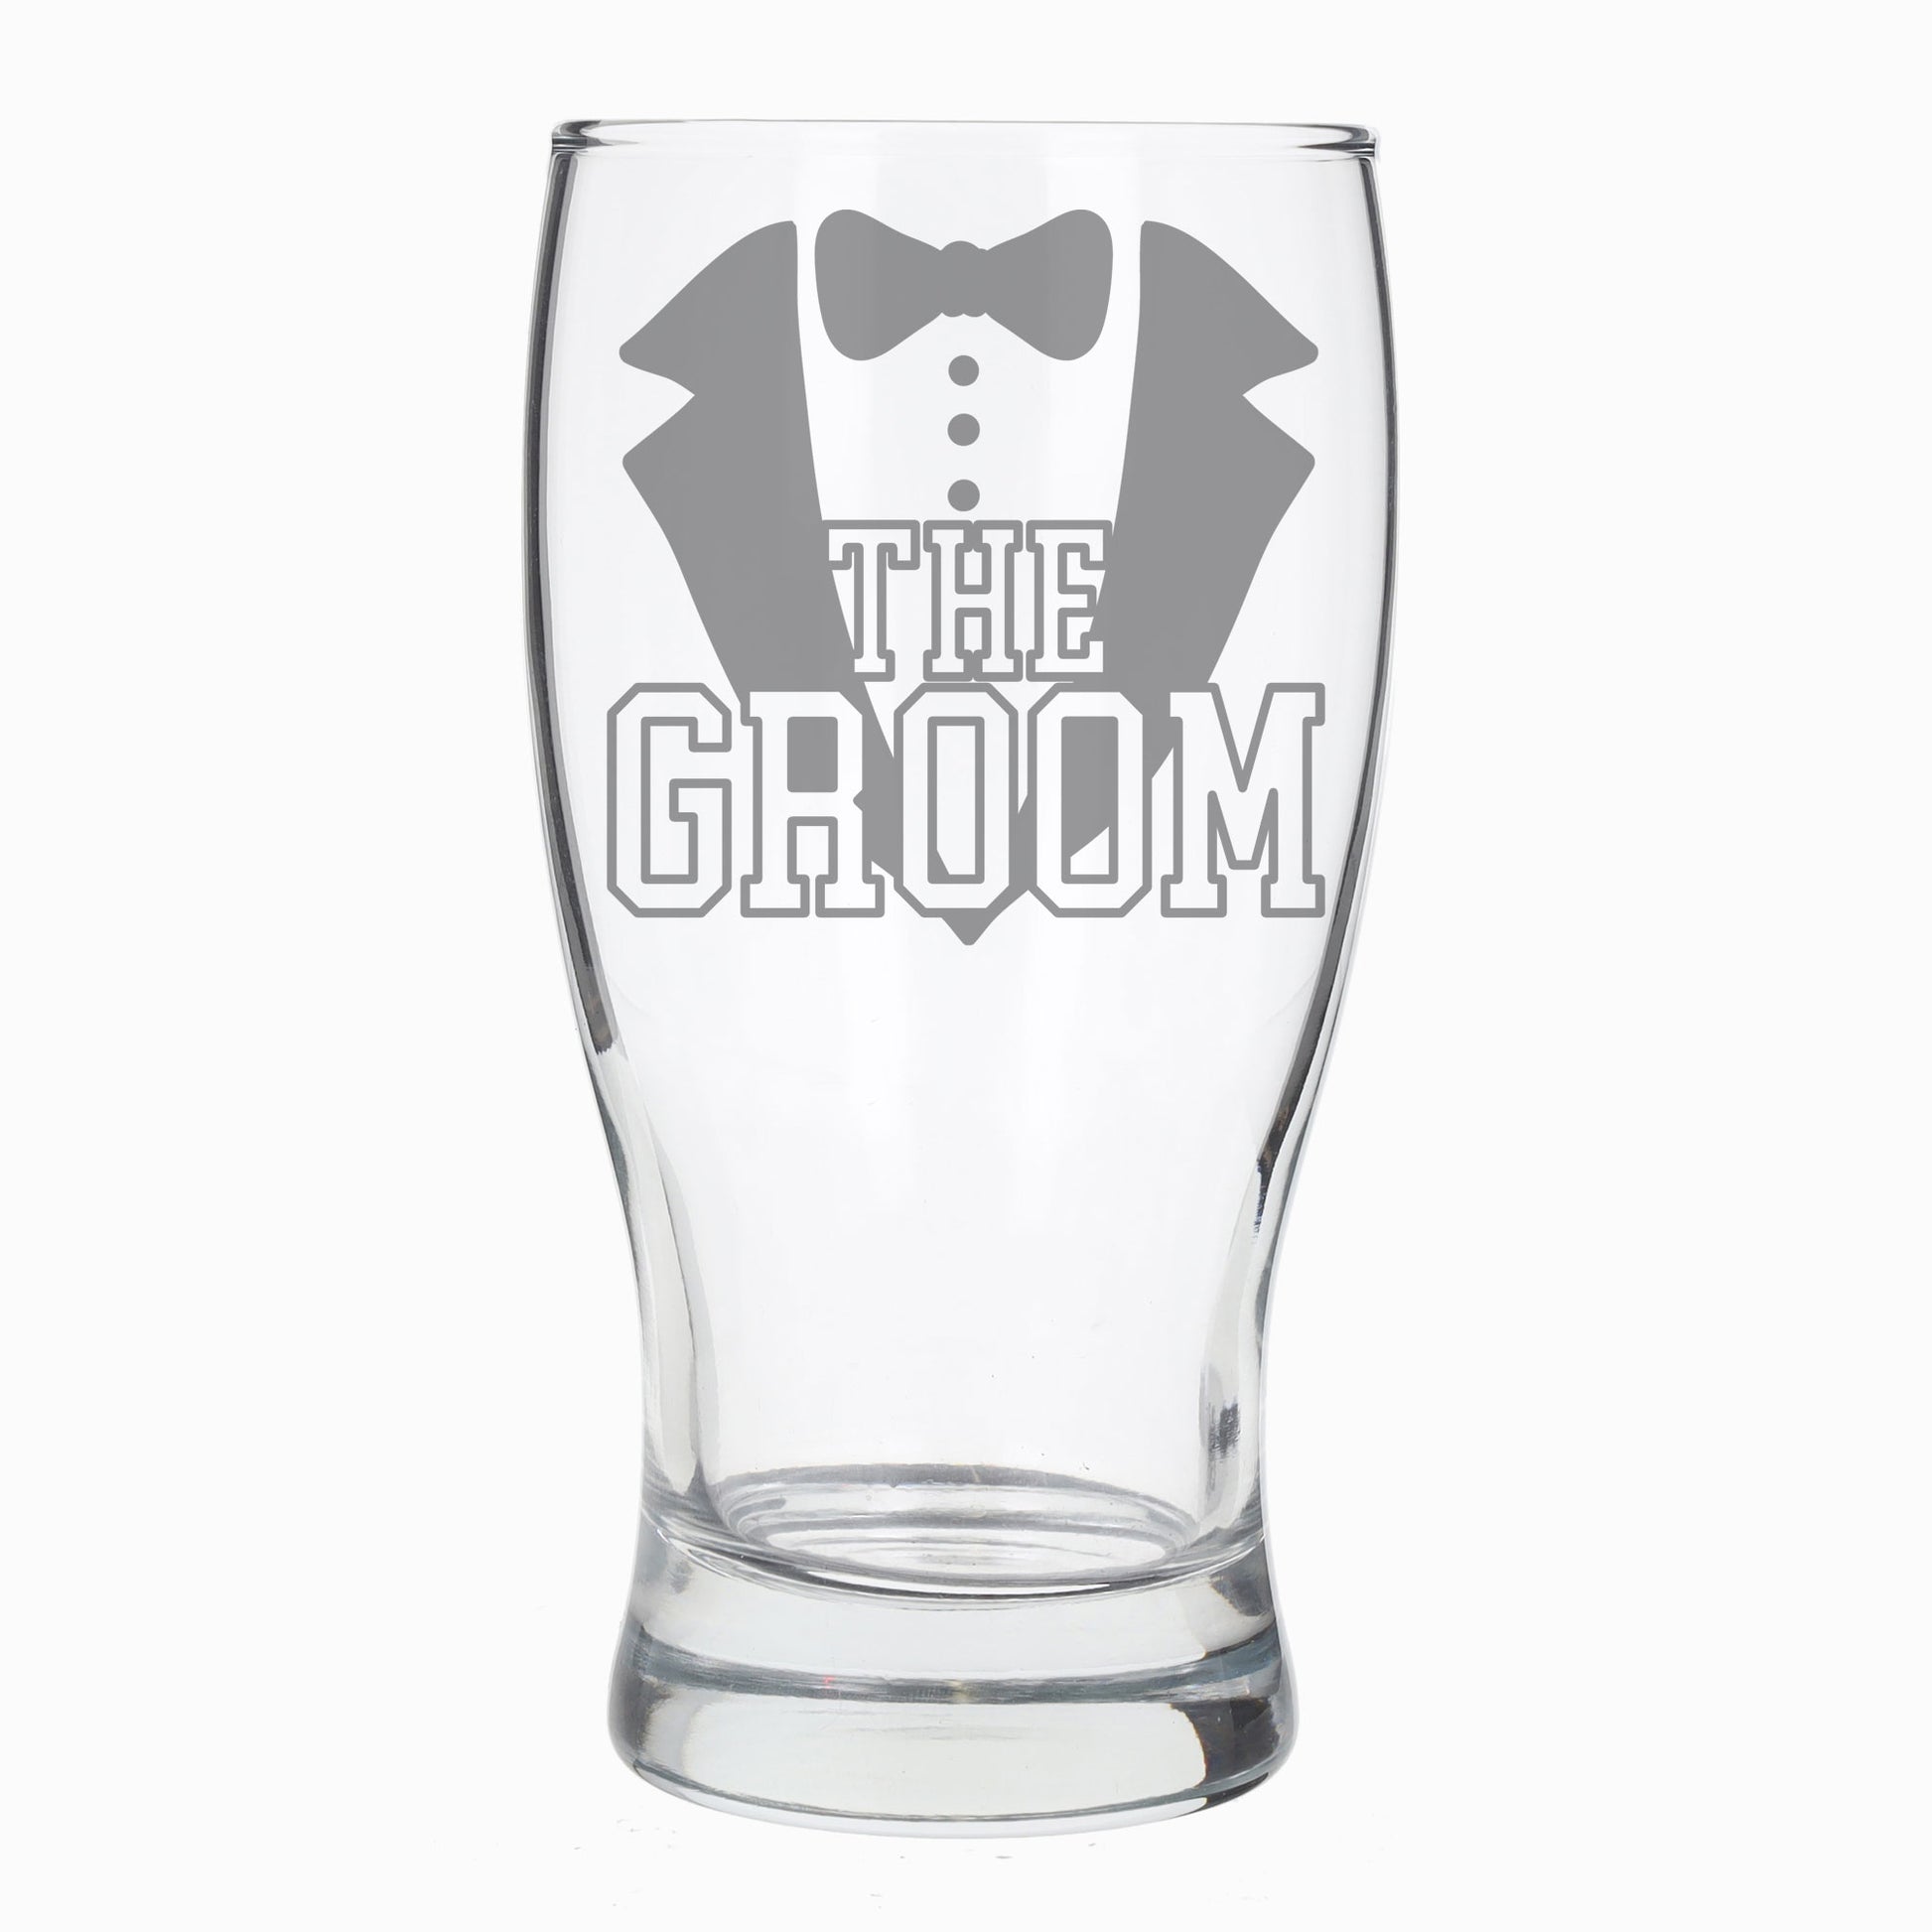 The Groom Engraved Beer Glass and/or Coaster Set  - Always Looking Good - Beer Glass Only  